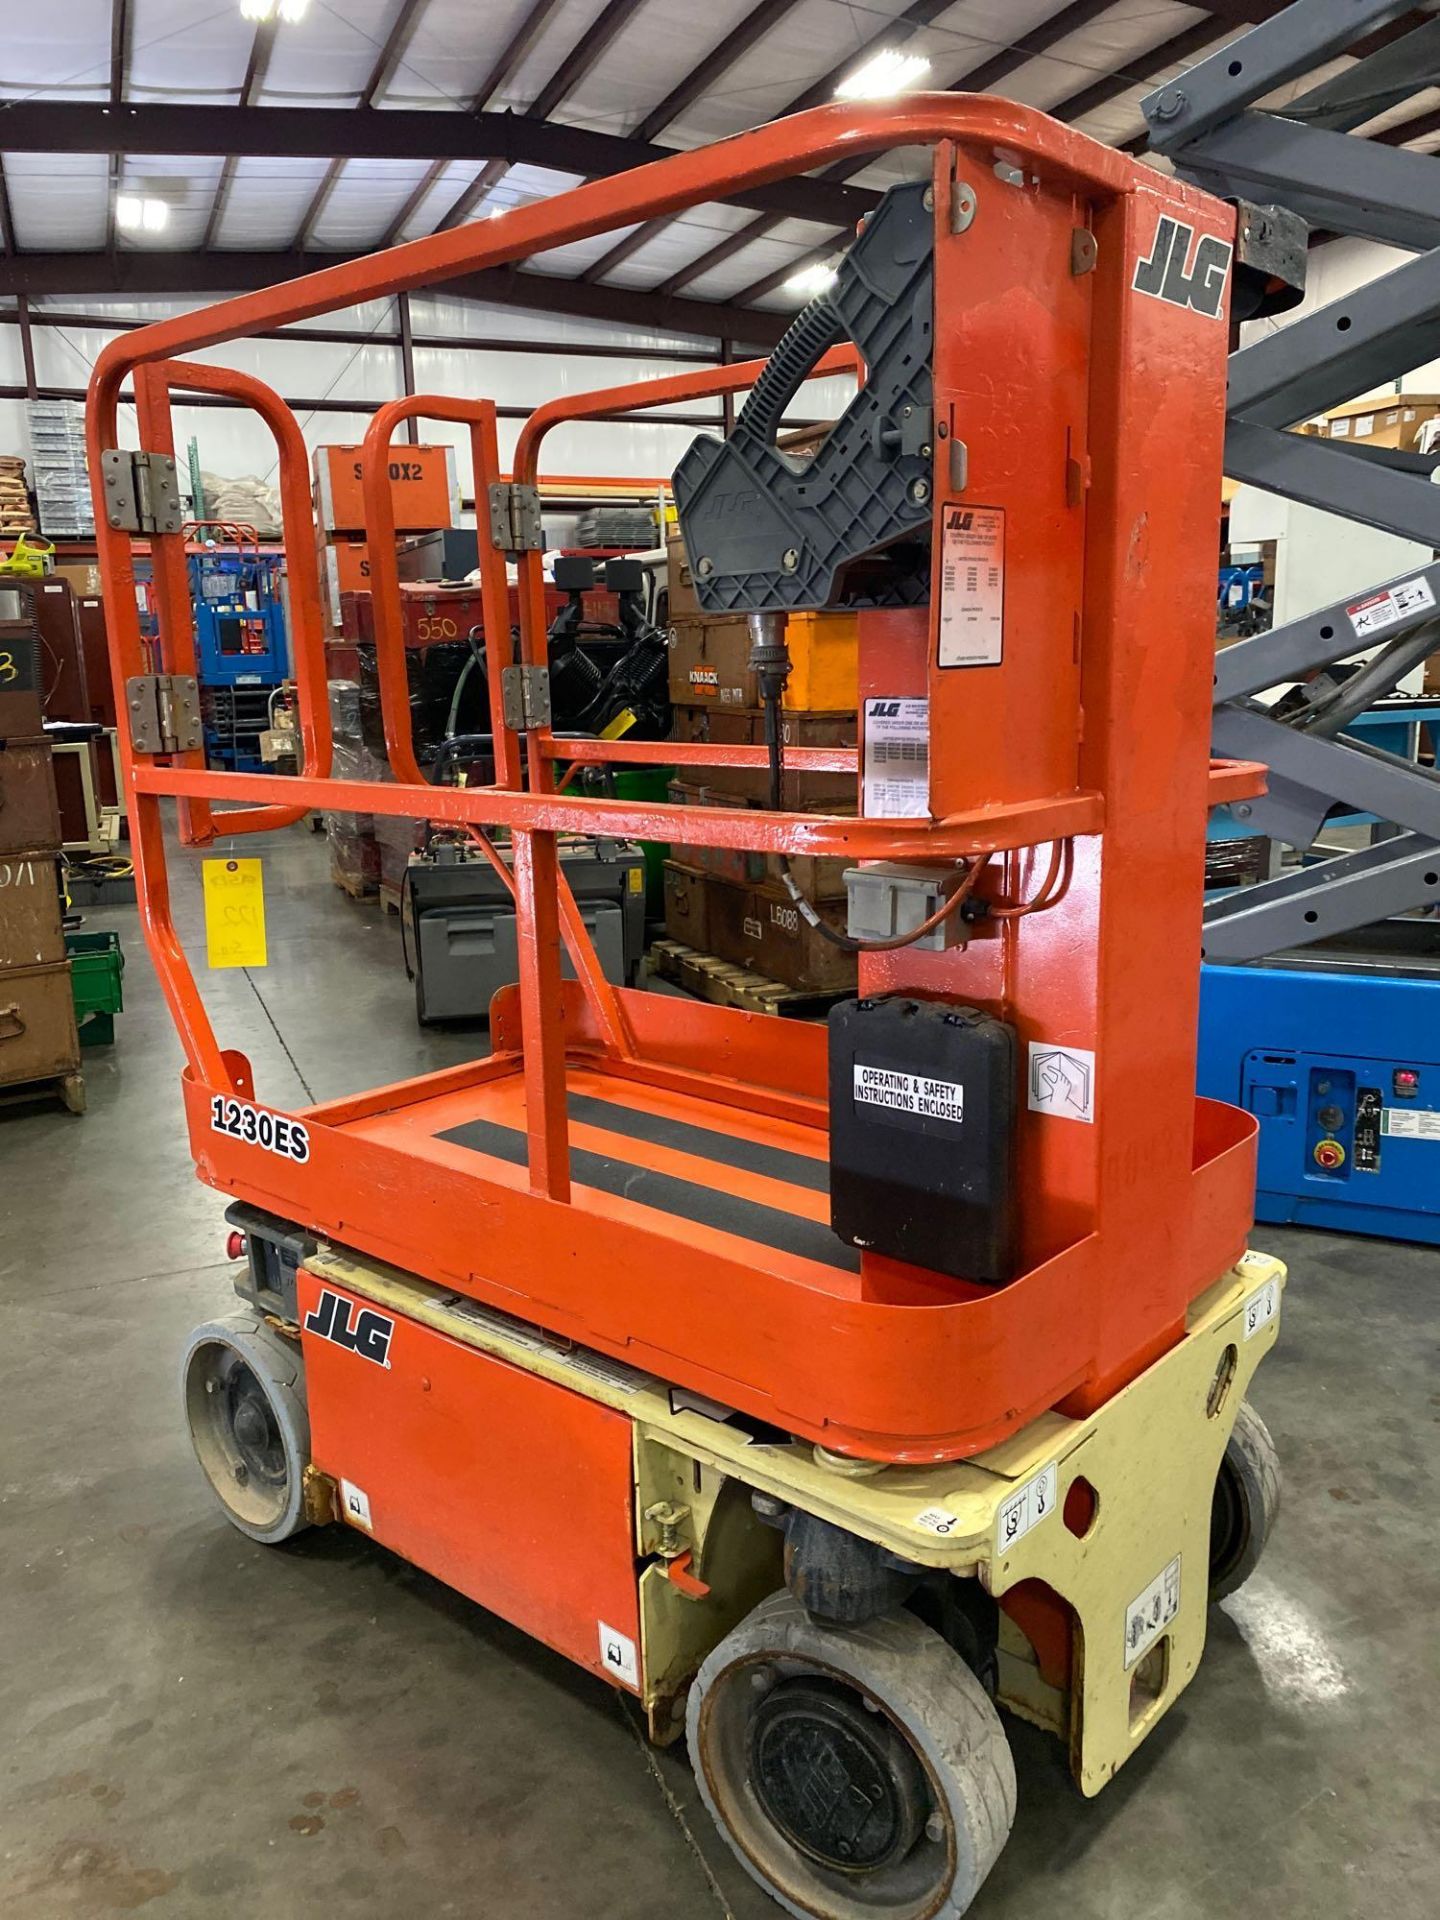 JLG 1230ES MAN LIFT, 12’ PLATFORM HEIGHT, 16’ WORKING HEIGHT, 24V, BUILT IN CHARGER, RUNS AND OPERAT - Image 11 of 14